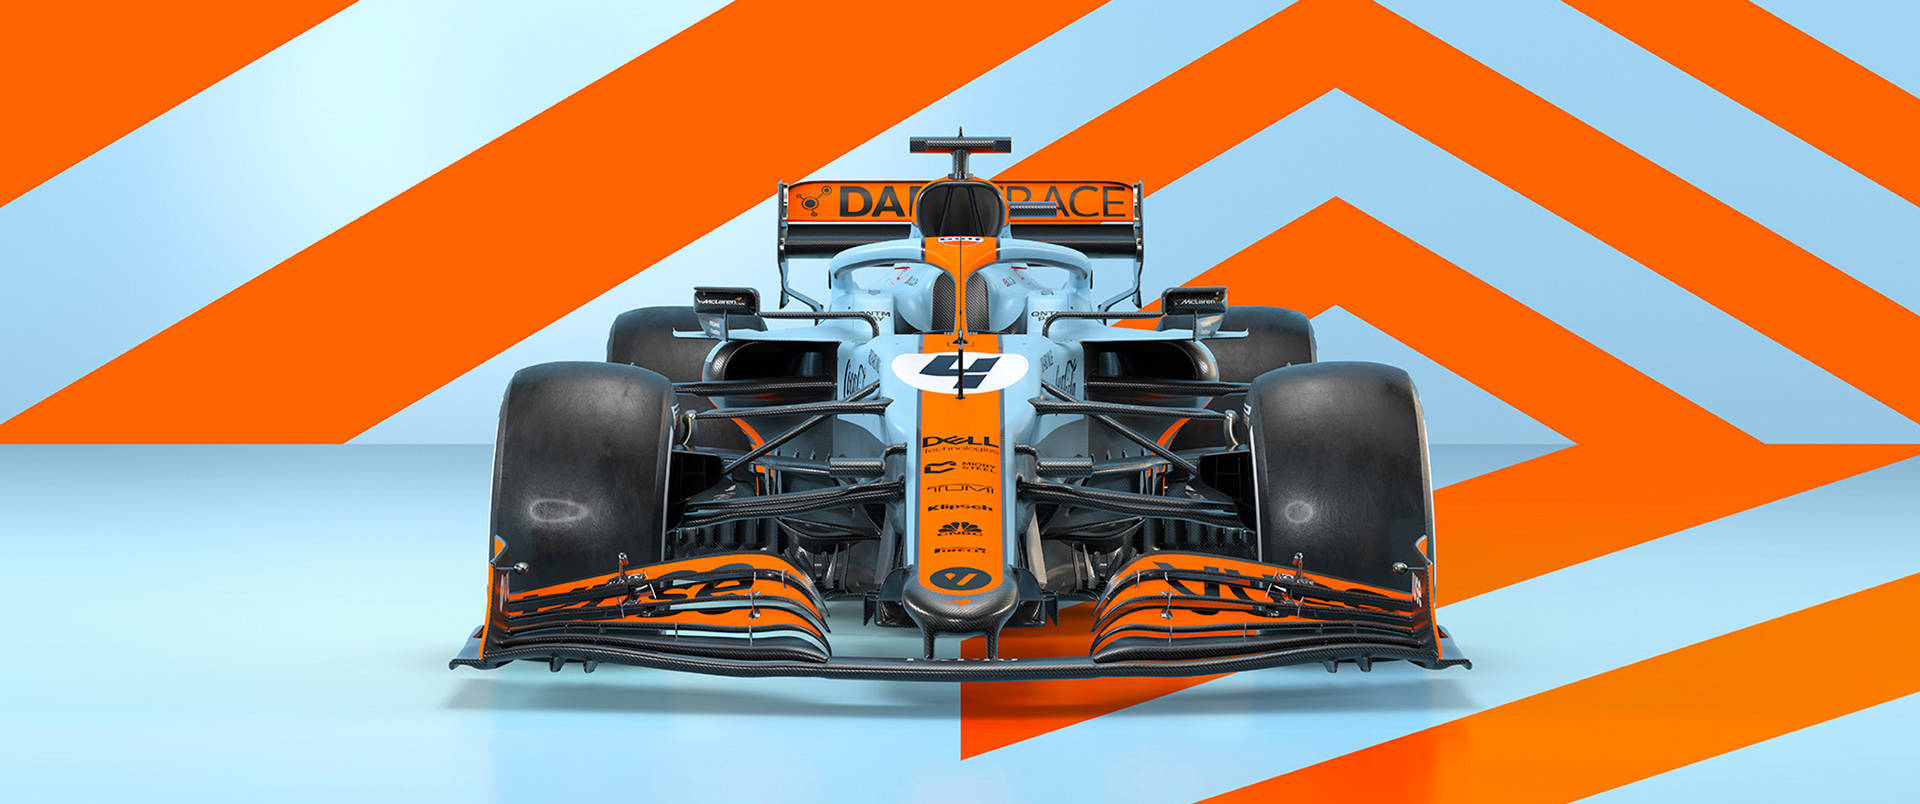 A Racing Car Is Shown On An Orange And White Background Background